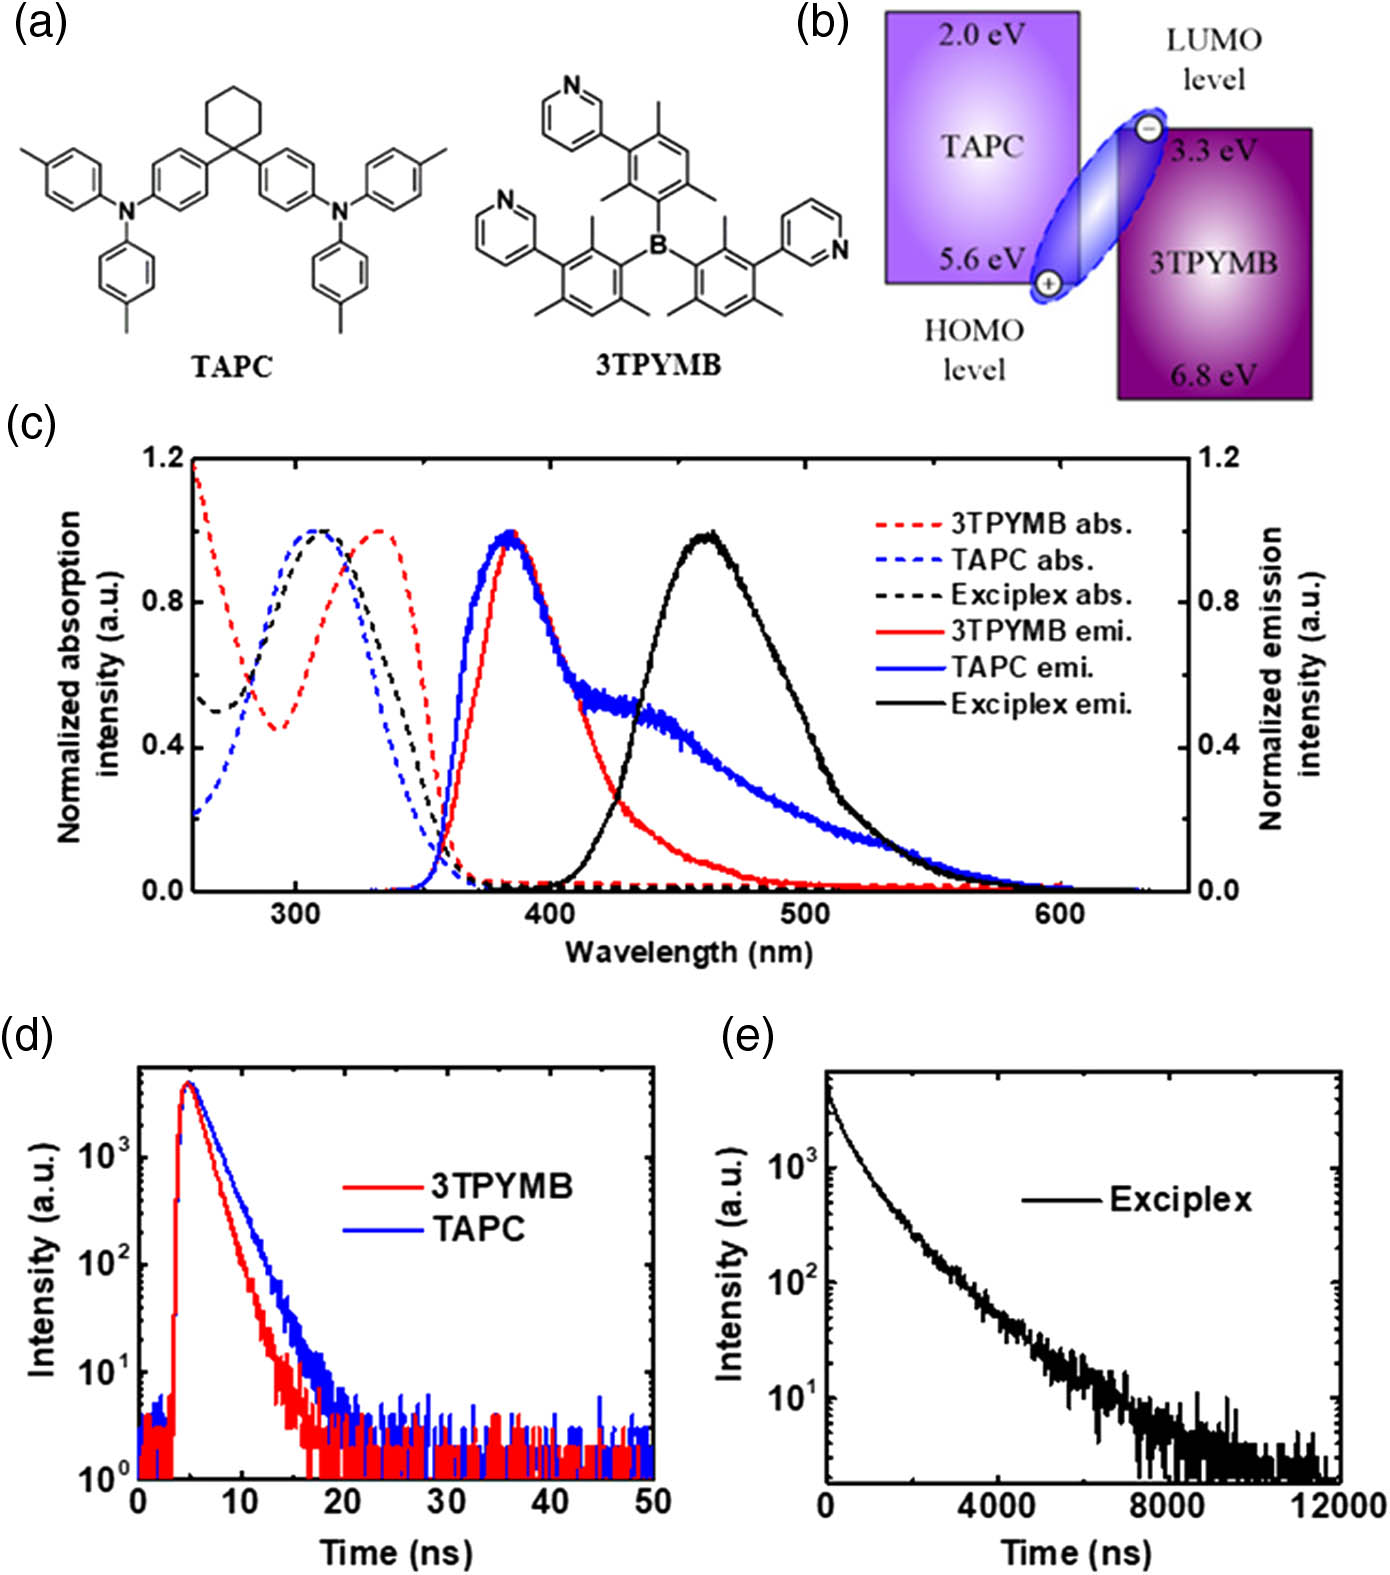 (a) Molecular structures of the donor TAPC and the acceptor 3TPYMB. (b) Energy diagram of TAPC and 3TPYMB, and scheme of exciplex formation. (c) Normalized optical absorption spectra and PL spectra of TAPC, 3TPYMB, and TAPC:3TPYMB blend (1:1). (d) Room temperature photoluminescence decay curve of TAPC and 3TPYMB. (e) Room temperature PL decay curve of TAPC:3TPYMB blend (1:1).